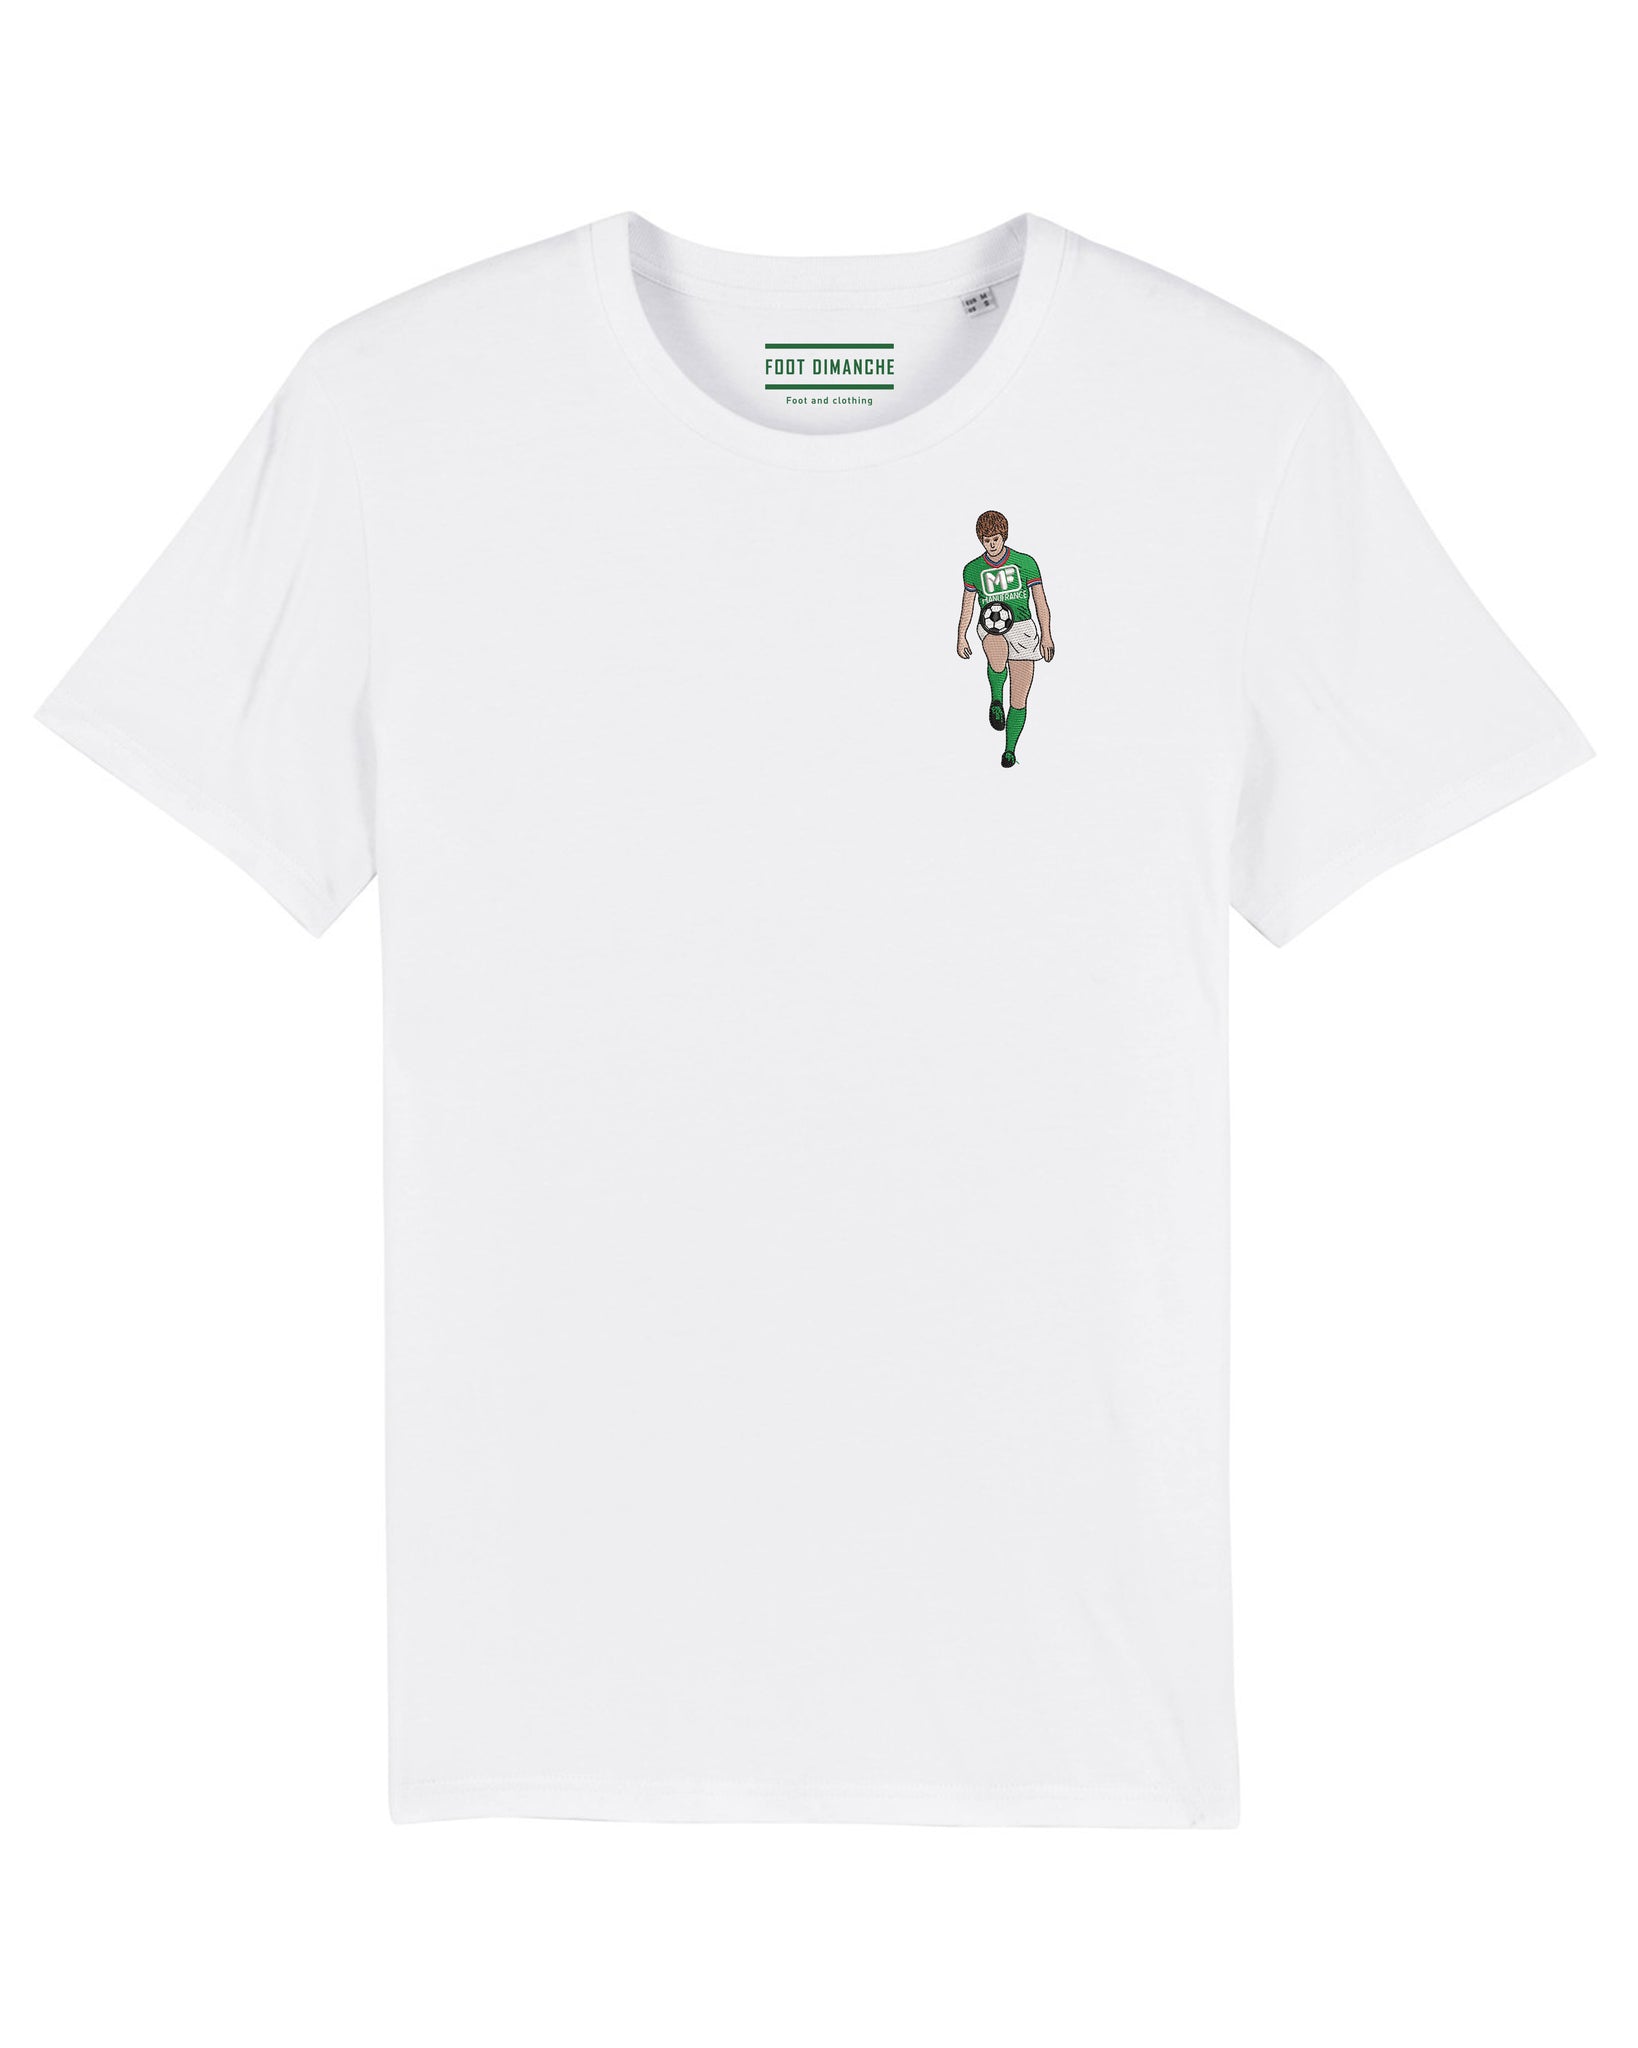 Manufrance Embroidered Player T-Shirt